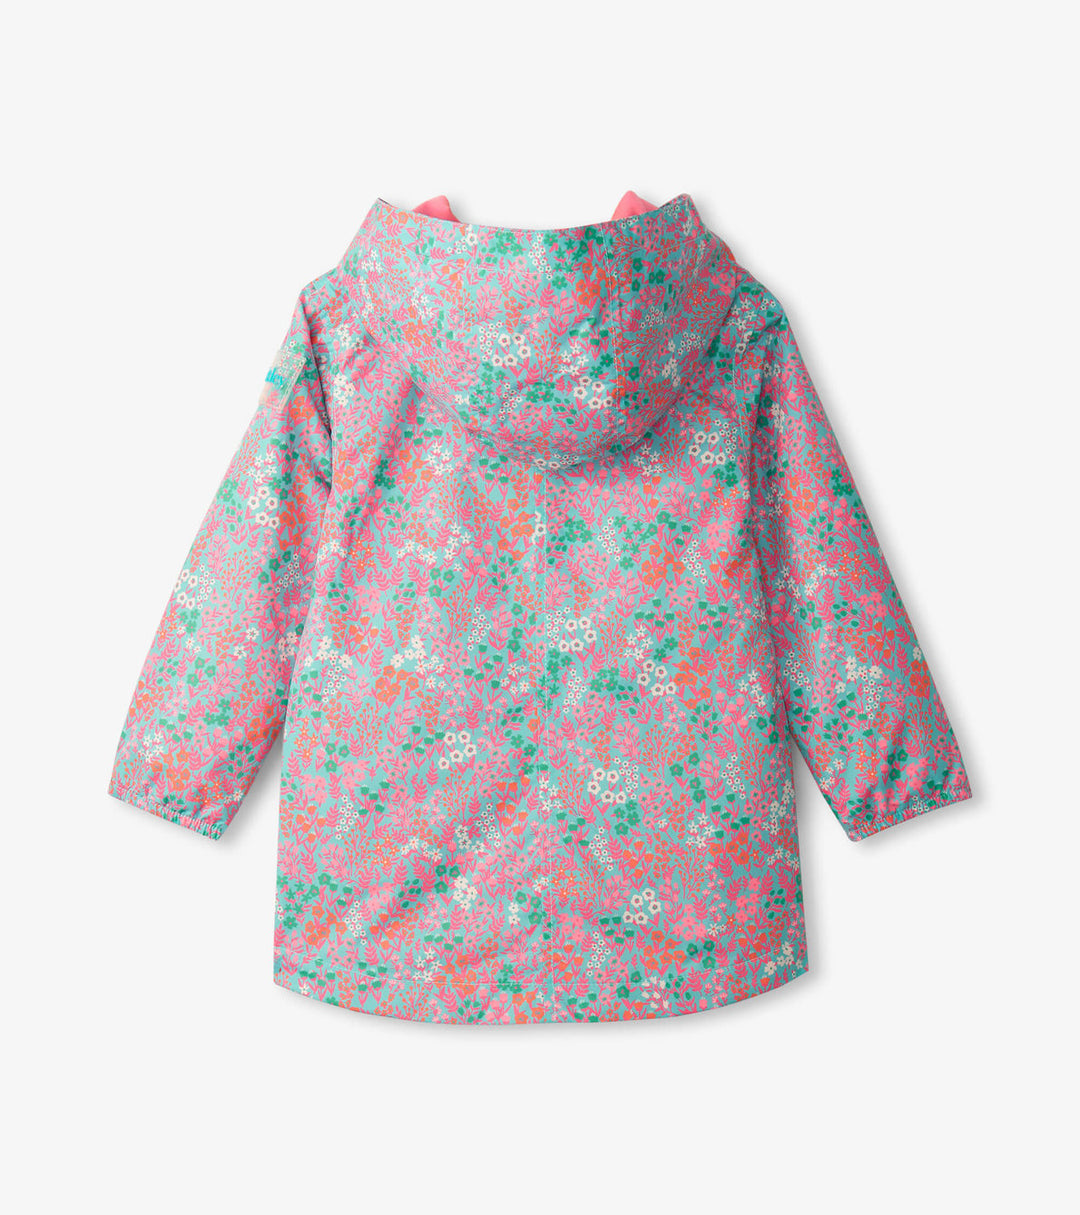 Ditsy Floral Spring Field Jacket